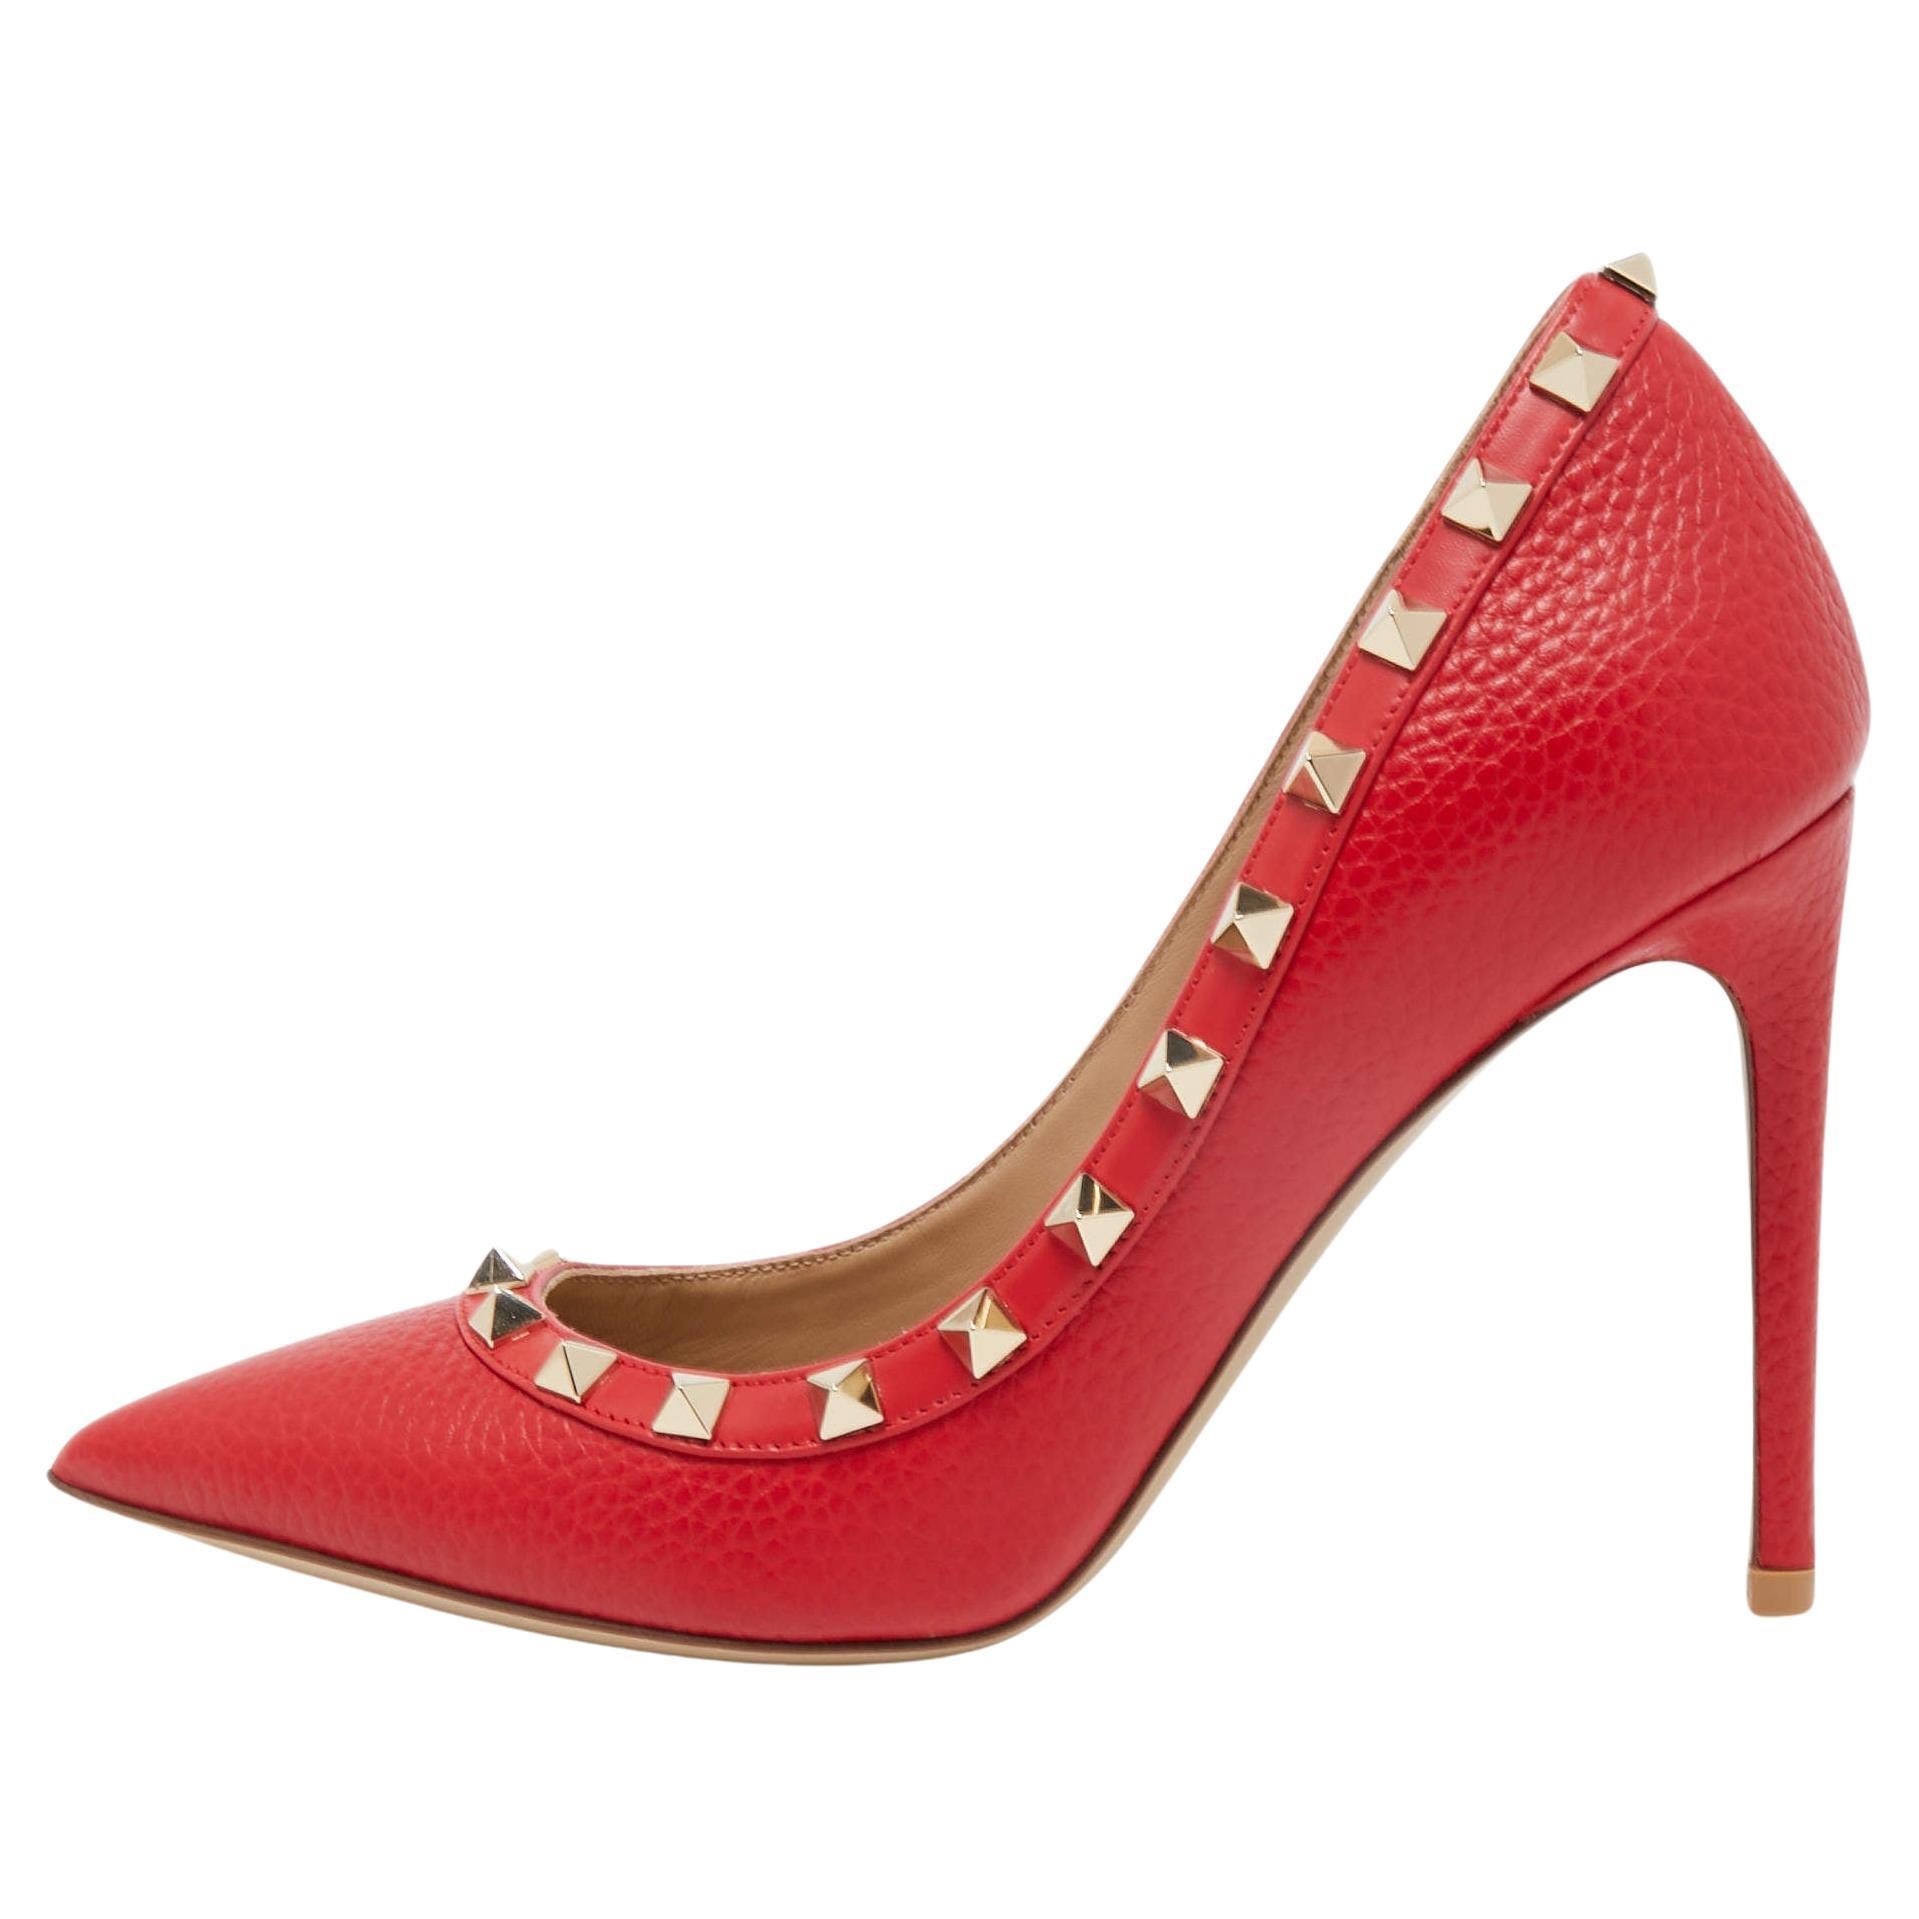 Valentino Red Leather Rockstud Pumps Size 36